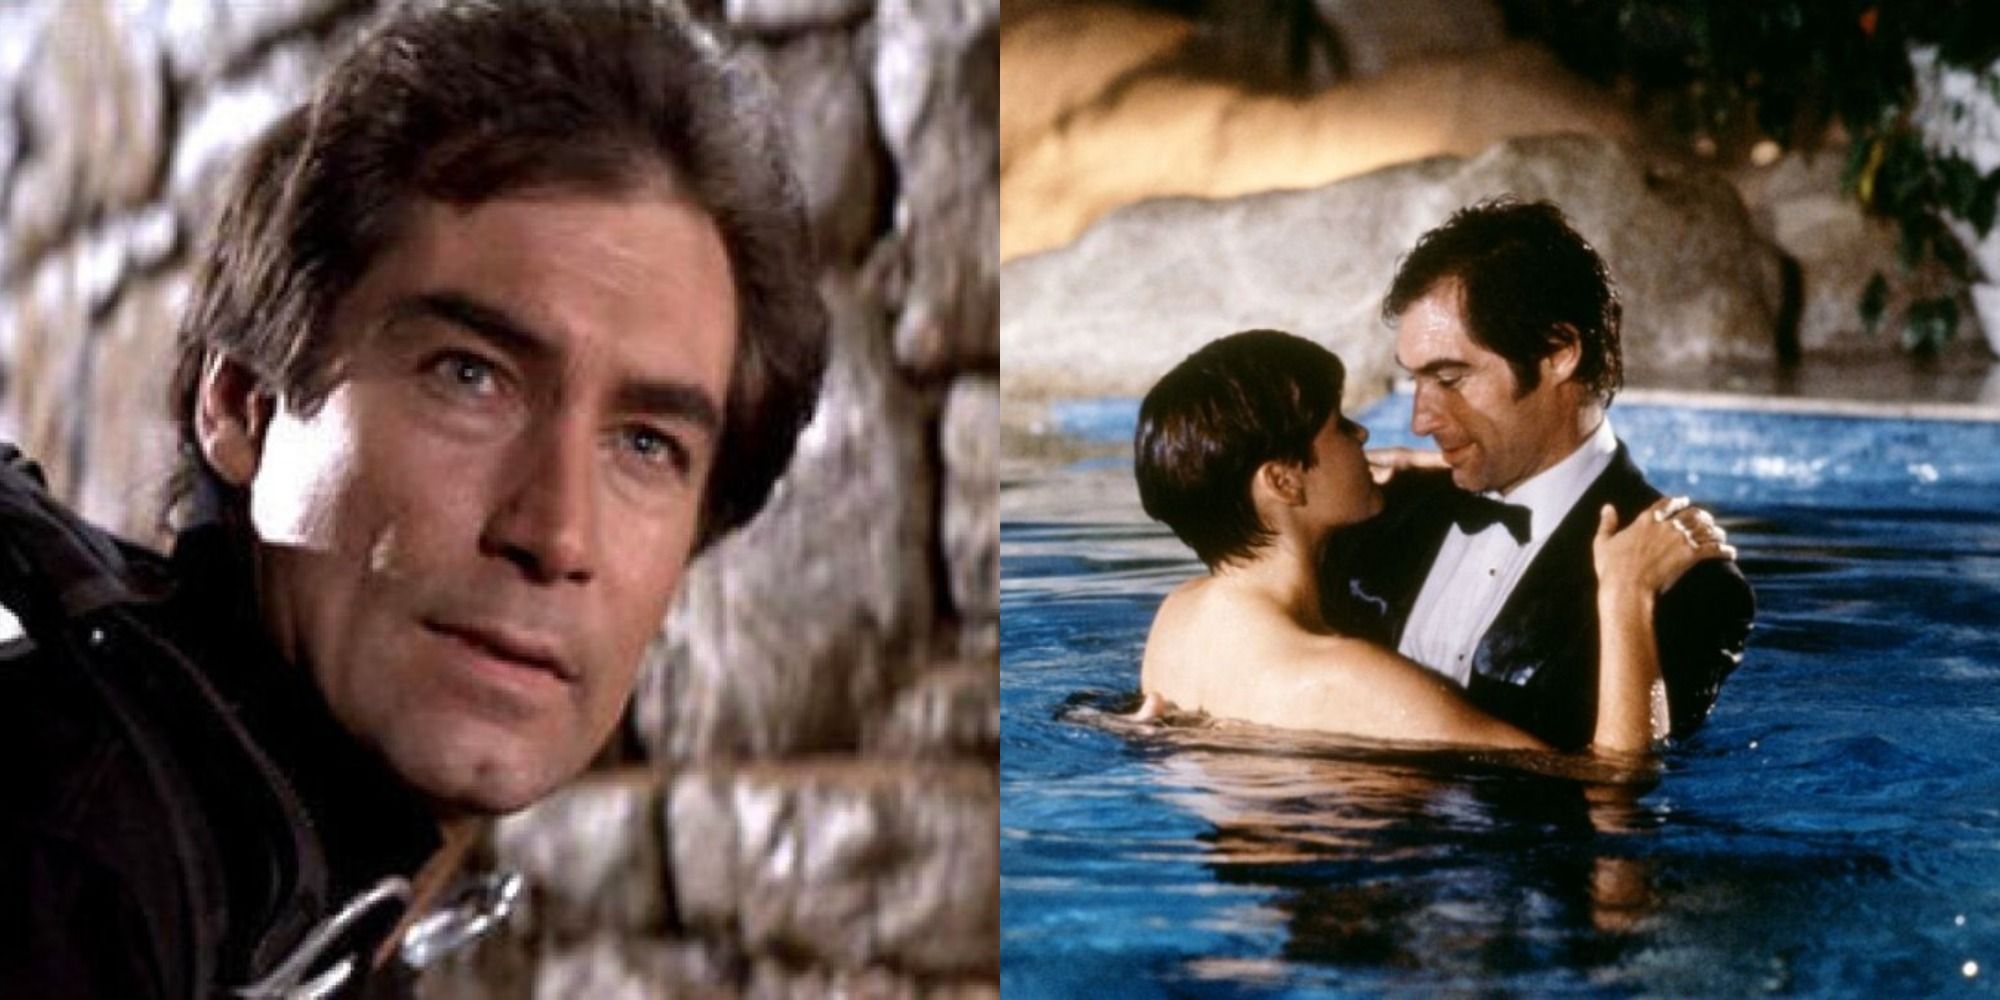 Split image of Timothy Dalton as James Bond in The Living Daylights and License to Kill